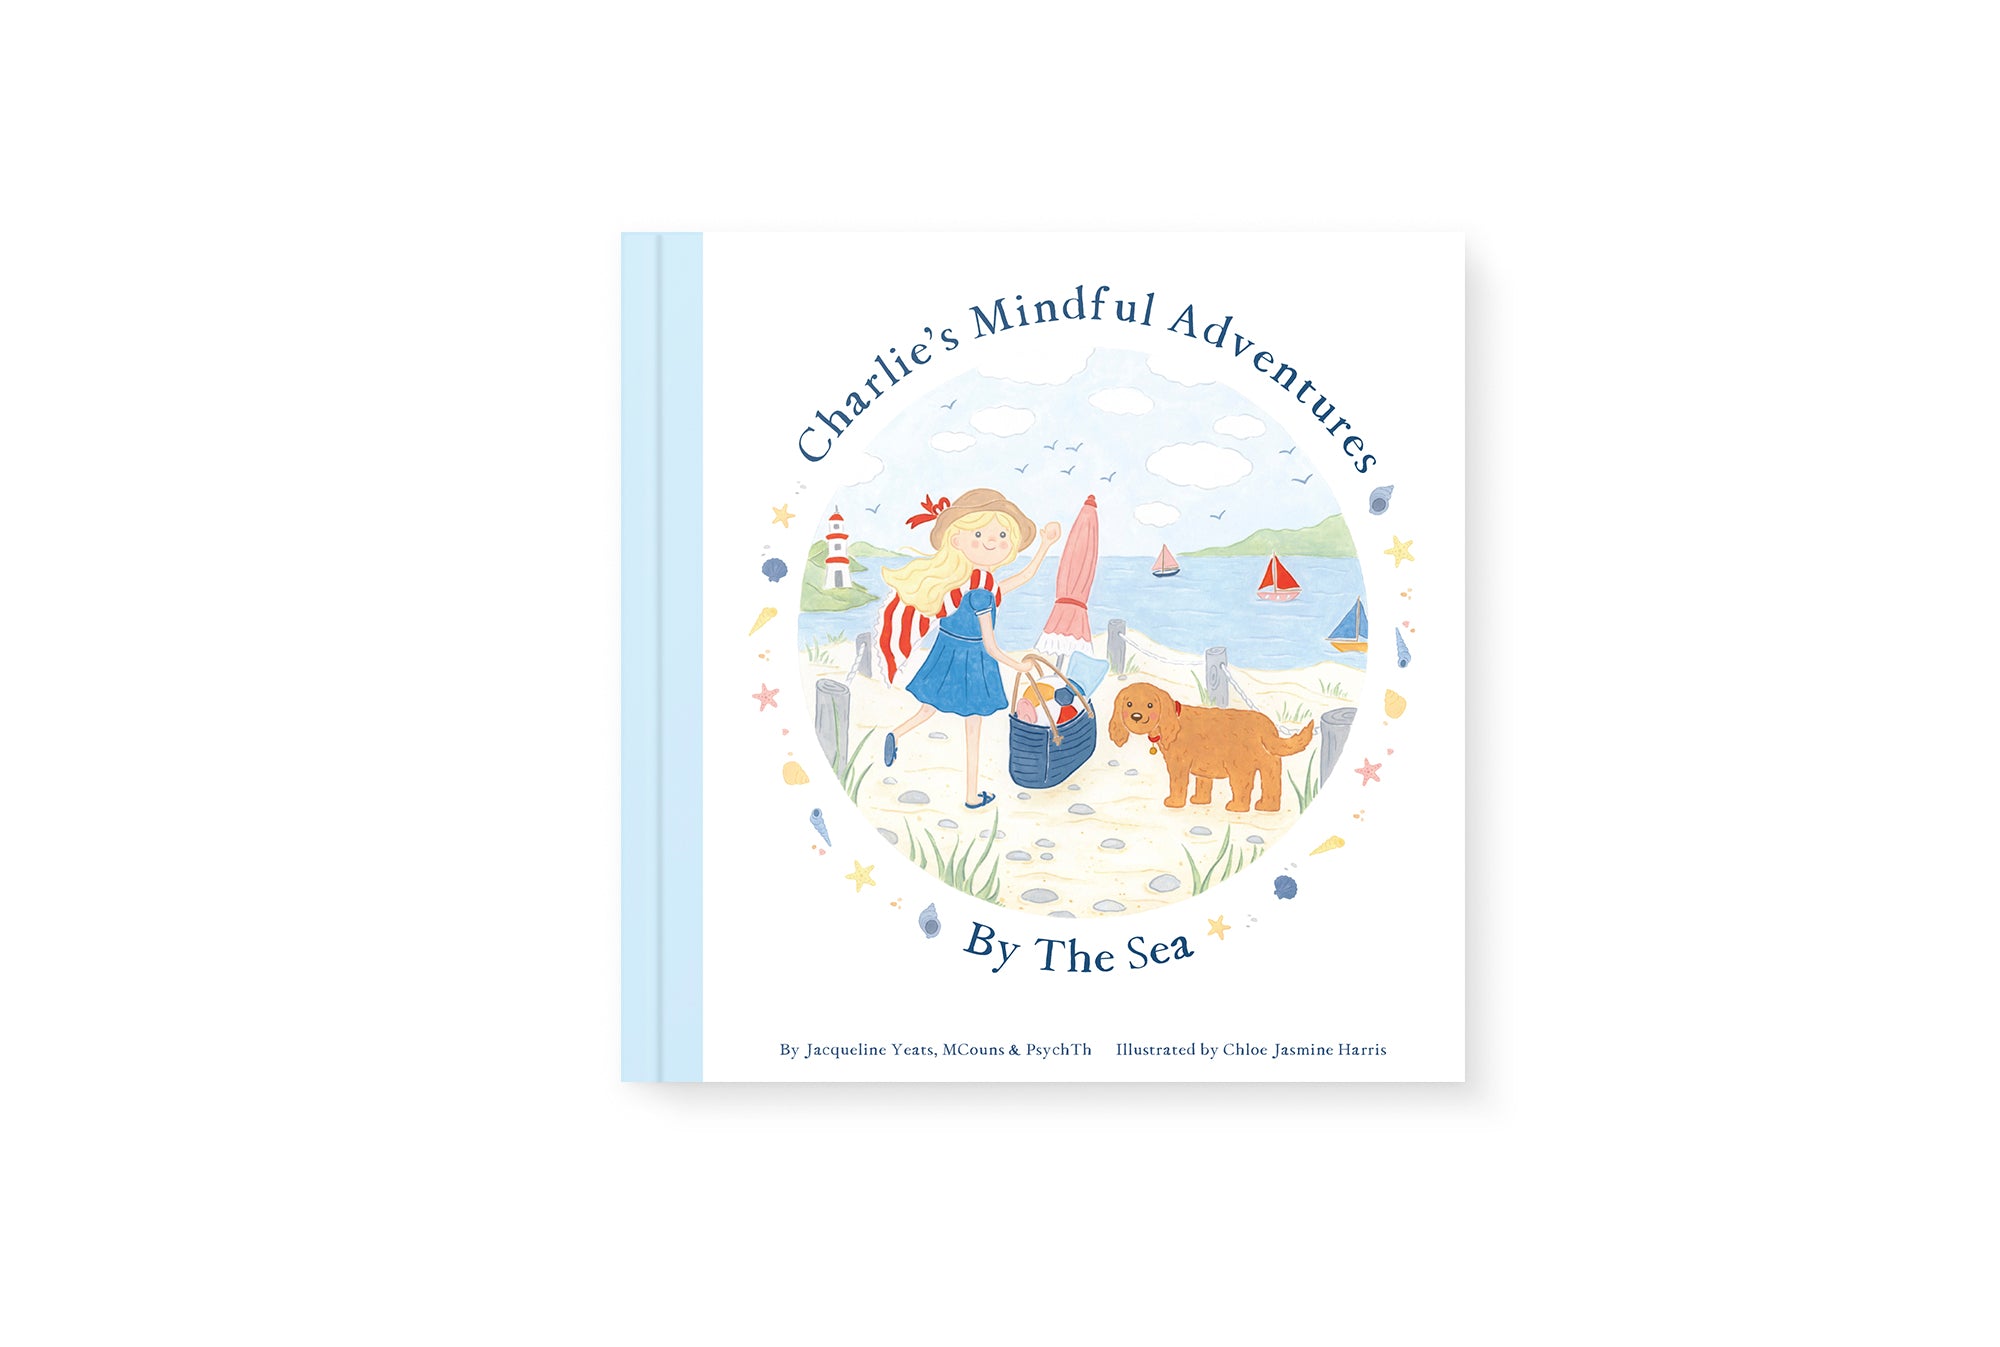 Mindful & Co Kids Charlie's Mindful Adventures By The Sea